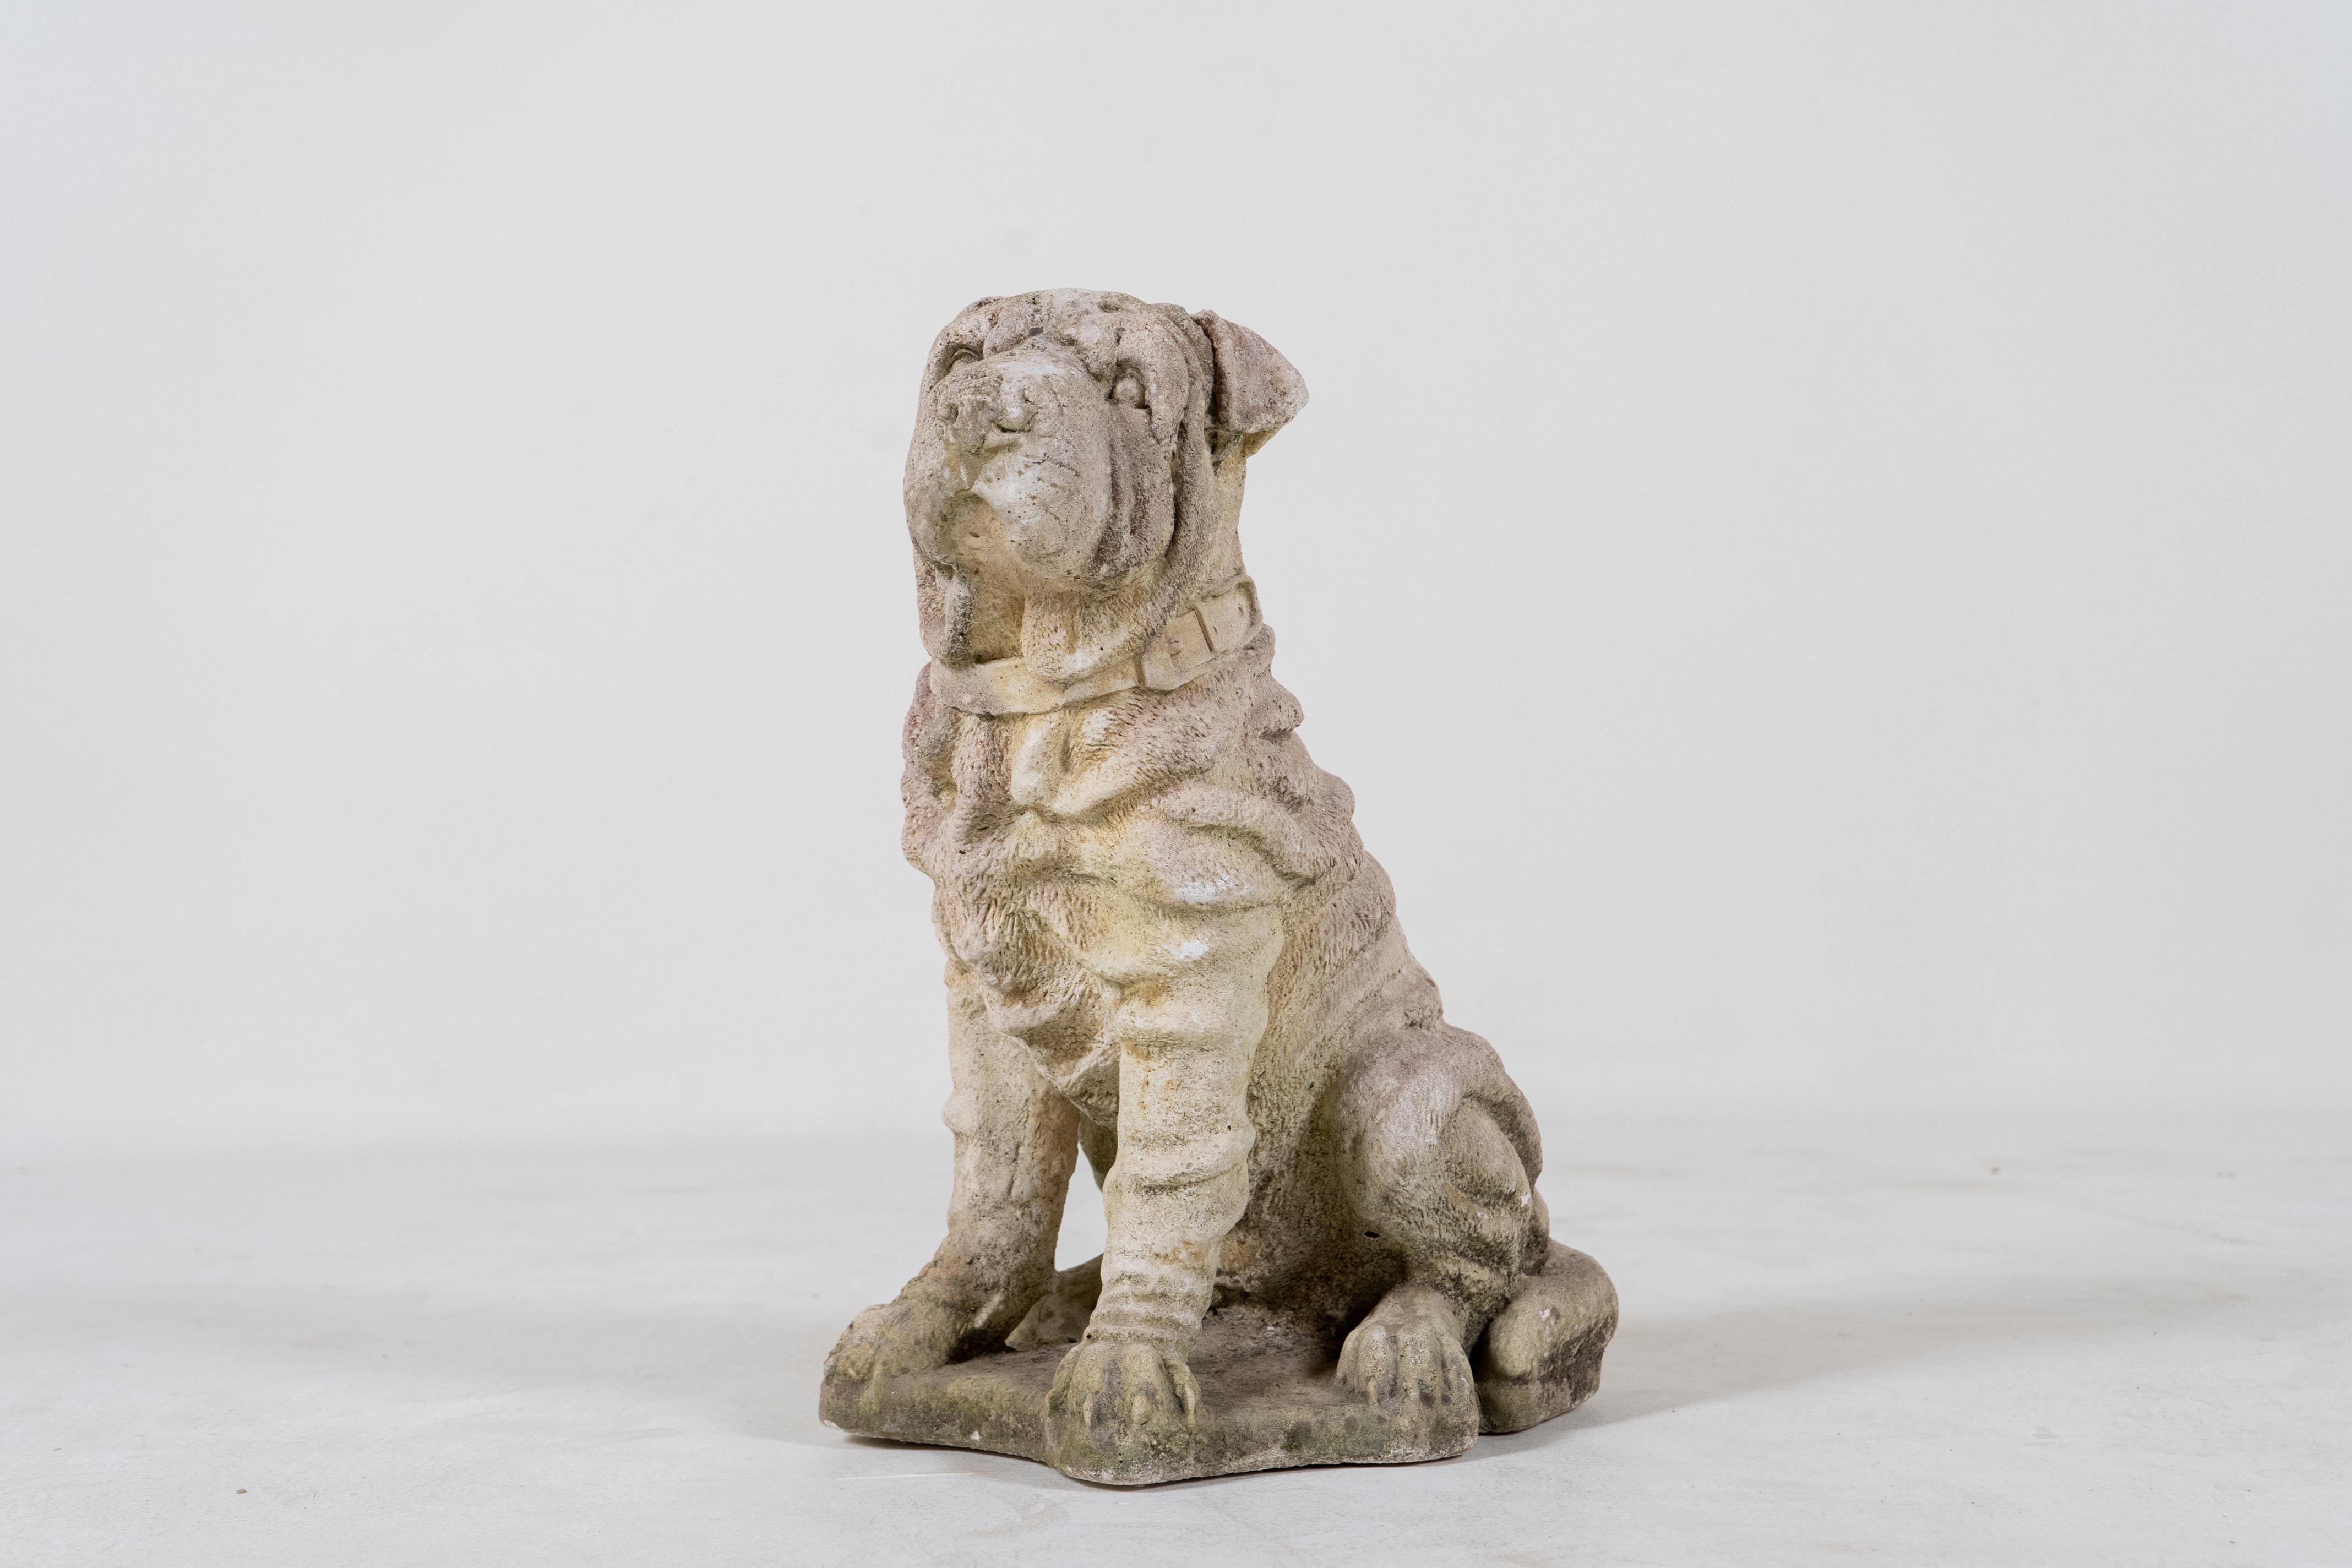 This cast stone sculpture is made with marble dust, producing a sparkling effect in certain lighting conditions.    The Shar Pei was the preferred breed of Chinese aristocrats before being driven almost to extinction in China in the mid-20th